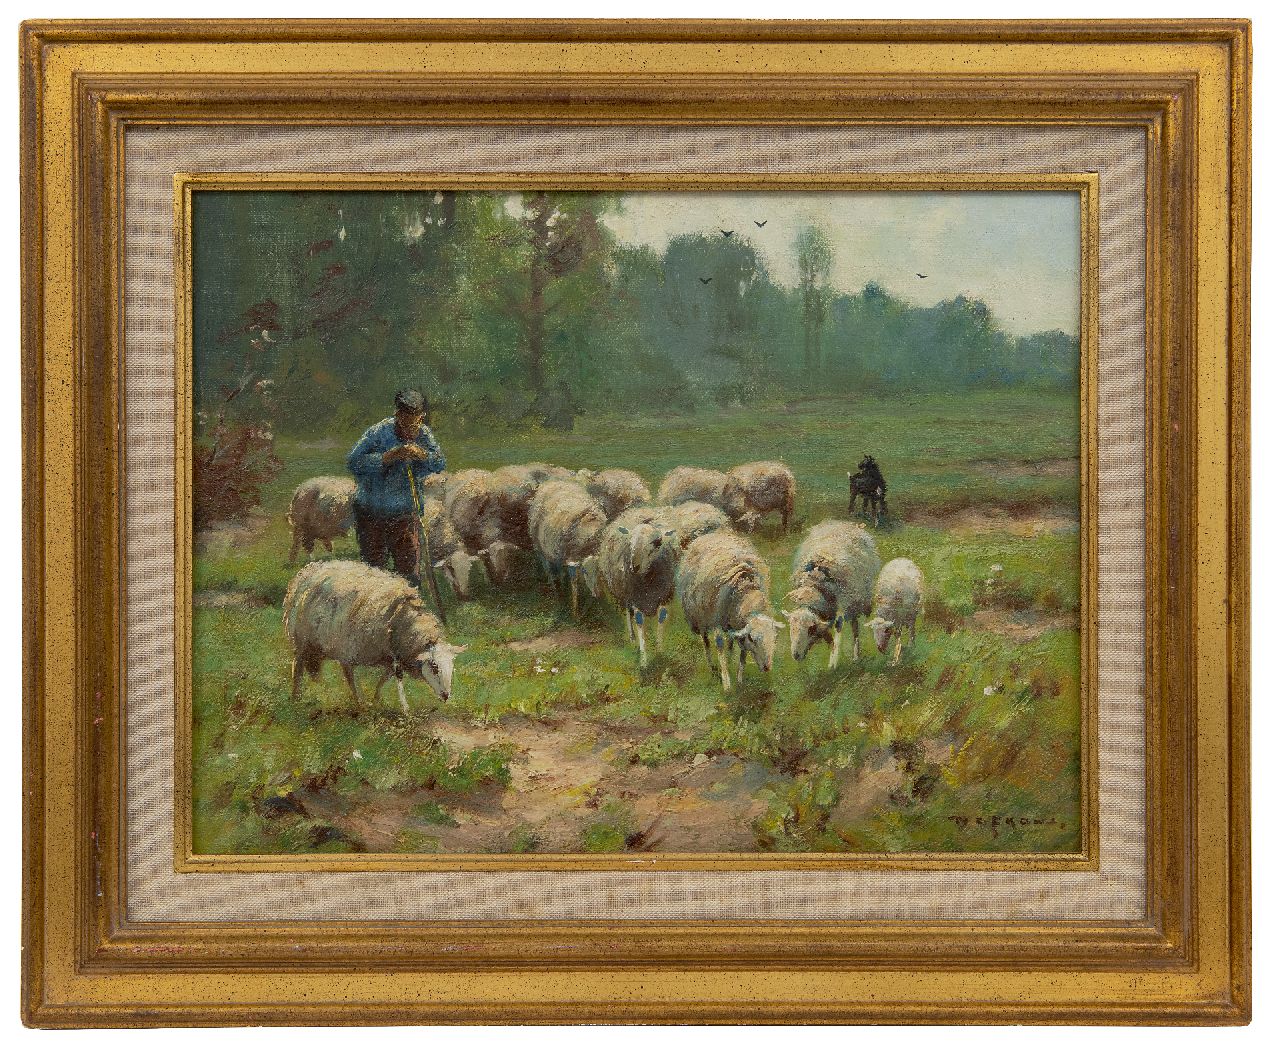 Nefkens M.J.  | Martinus Jacobus Nefkens | Paintings offered for sale | On the heath, oil on canvas 30.1 x 40.2 cm, signed l.r.